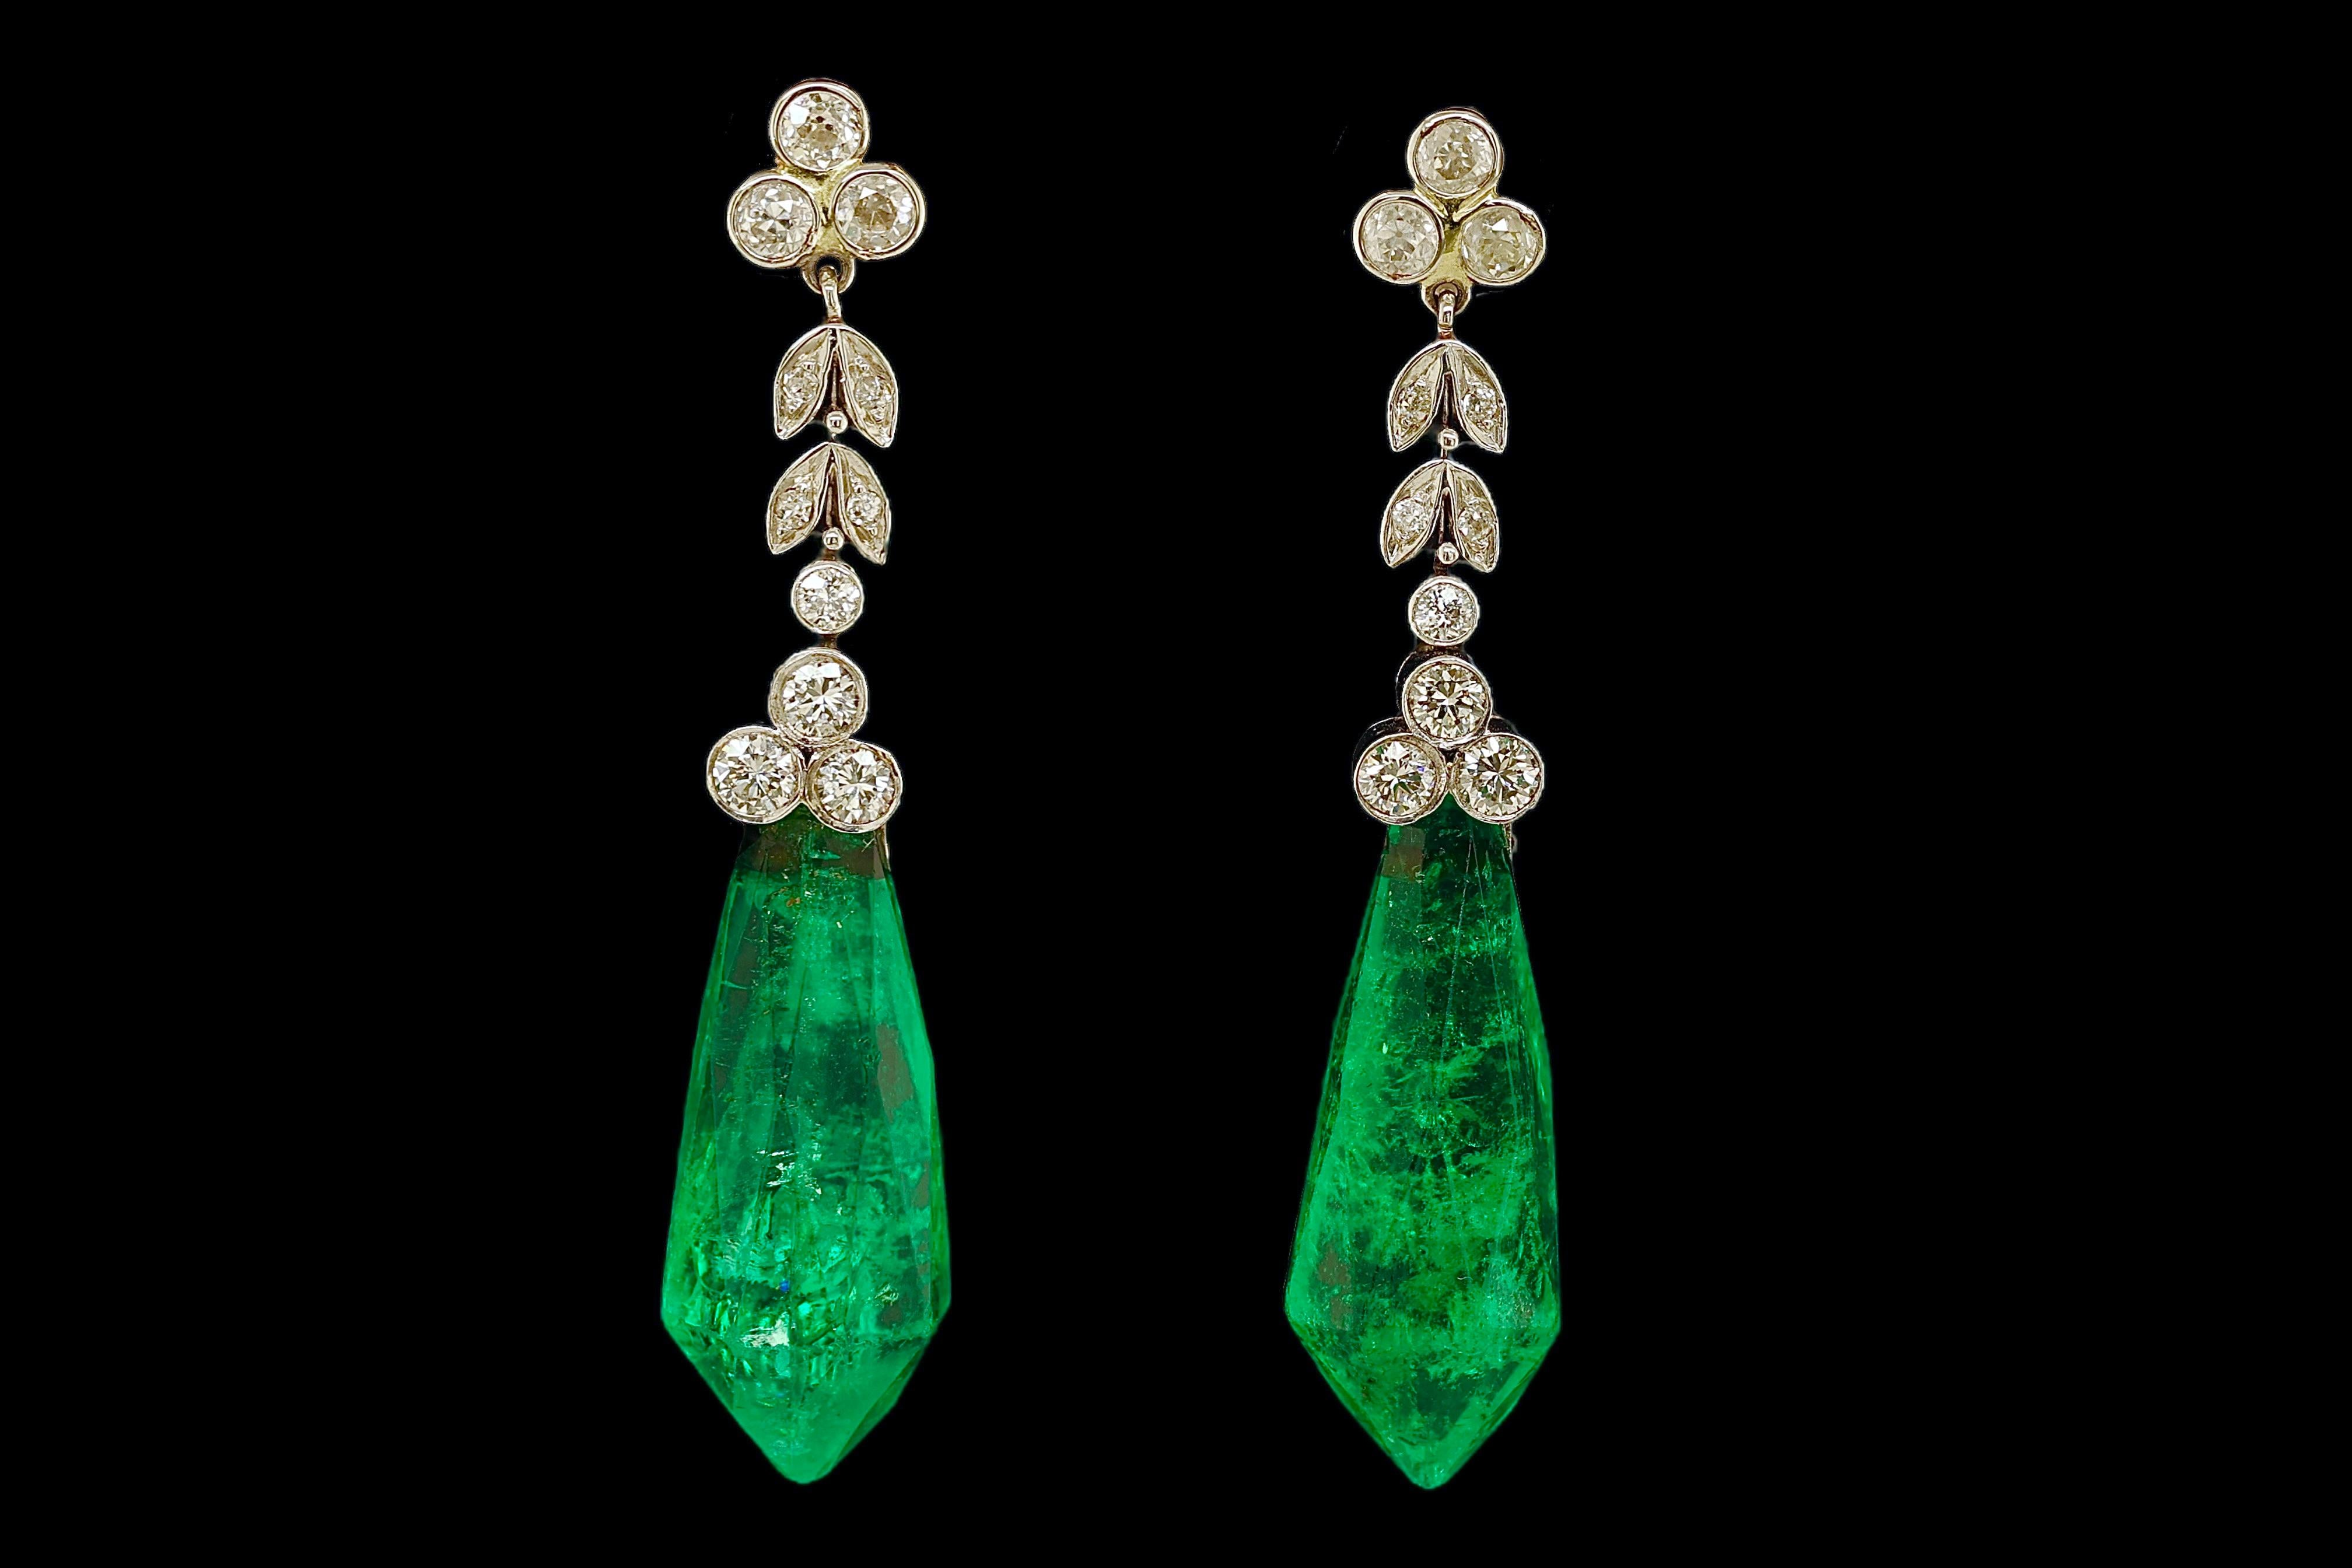 Gorgeous 18kt White Gold Dangling Earrings With 32 ct Emeralds and 1.46 ct Diamonds, Estate Sultan Of Oman Qaboos Bin Said

Emerald: Collectors Rare 2 Natural Emeralds faceted , Fancy green, together approx. 32 ct. 
Comes with GRS certificate